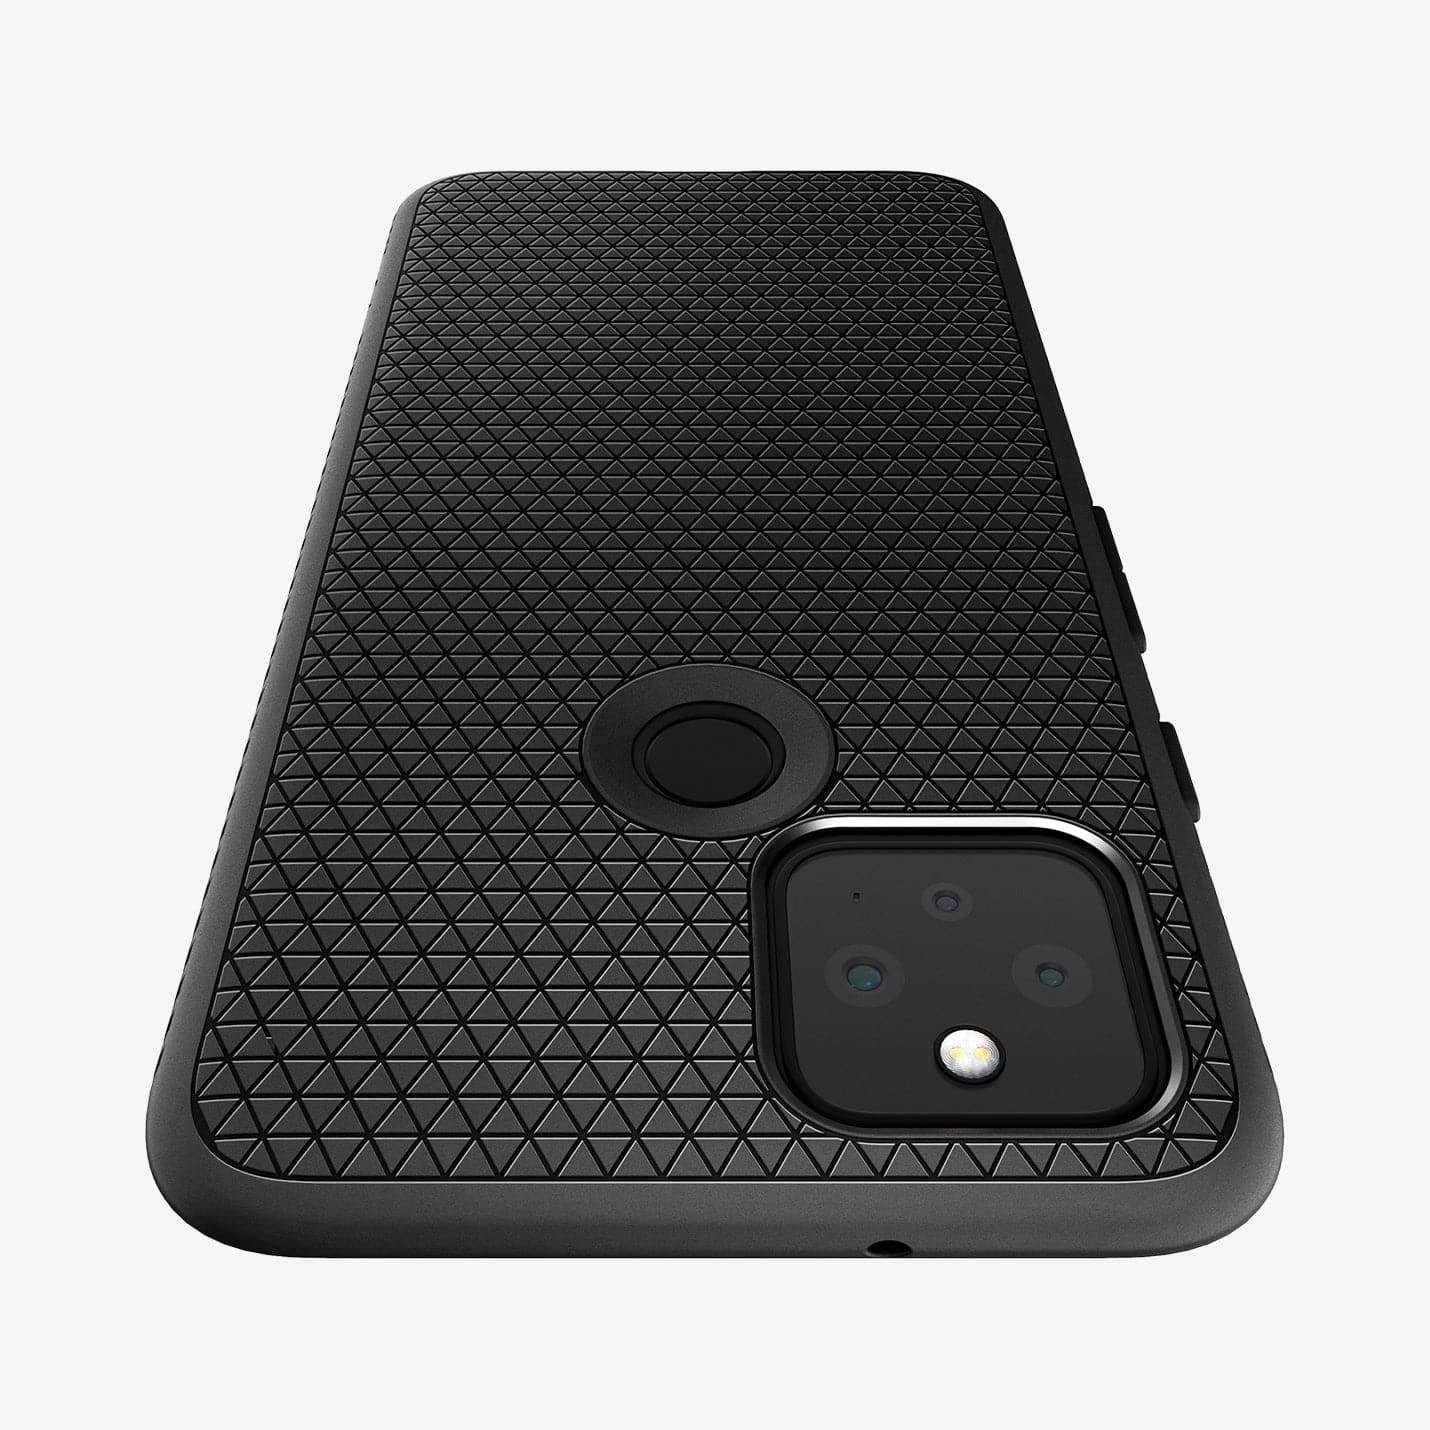 ACS01896 - Pixel 5 Case Liquid Air in black showing the back zoomed in to show the fine details